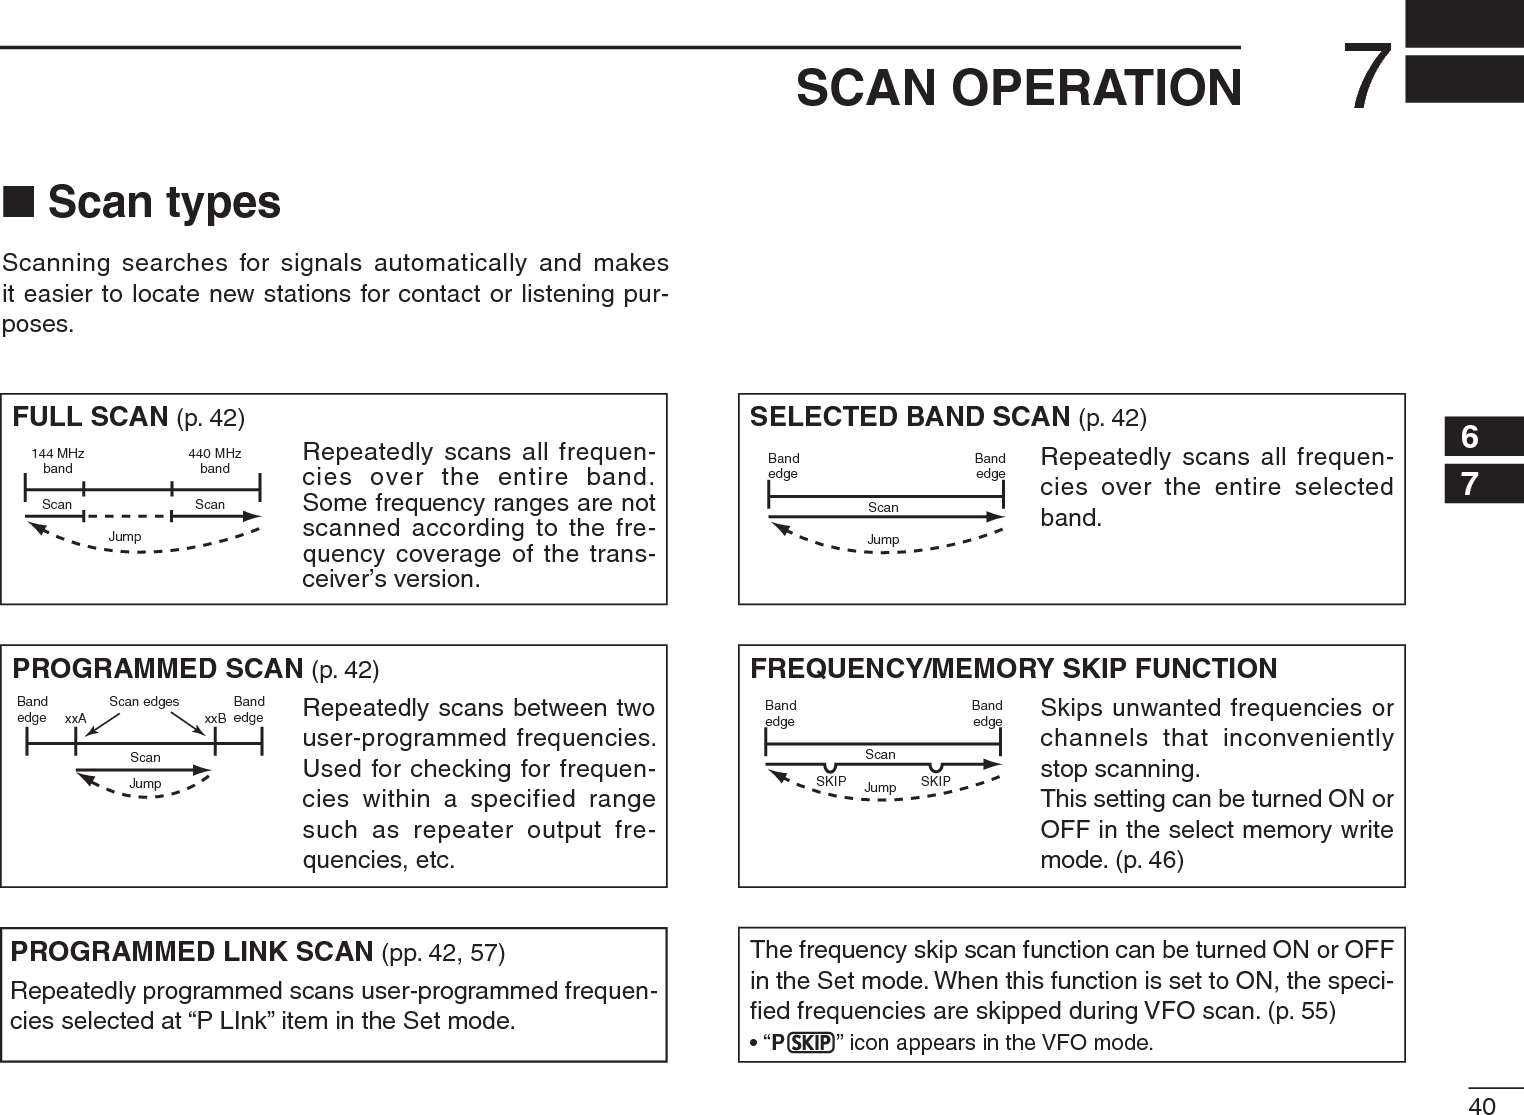 407SCAN OPERATION12345678910111213141516171819N Scan typesScanning searches for signals automatically and makes it easier to locate new stations for contact or listening pur-poses.FULL SCAN (p. 42)Repeatedly scans all frequen-cies over the entire band. Some frequency ranges are not scanned according to the fre-quency coverage of the trans-ceiver’s version.SELECTED BAND SCAN (p. 42)Repeatedly scans all frequen-cies over the entire selected band. FREQUENCY/MEMORY SKIP FUNCTIONSkips unwanted frequencies or channels that inconveniently stop scanning.This setting can be turned ON or OFF in the select memory write mode. (p. 46)PROGRAMMED SCAN (p. 42)Repeatedly scans between two user-programmed frequencies. Used for checking for frequen-cies within a specified range such as repeater output fre-quencies, etc.144 MHzband440 MHzbandScanScanJumpBandedgeBandedgeScanJumpBandedge xxA xxBBandedgeScan edgesScanJumpBandedgeBandedgeScanSKIP SKIPJumpPROGRAMMED LINK SCAN (pp. 42, 57)Repeatedly programmed scans user-programmed frequen-cies selected at “P LInk” item in the Set mode.The frequency skip scan function can be turned ON or OFF   in the Set mode. When this function is set to ON, the speci-ﬁed frequencies are skipped during VFO scan. (p. 55)•“P” icon appears in the VFO mode.